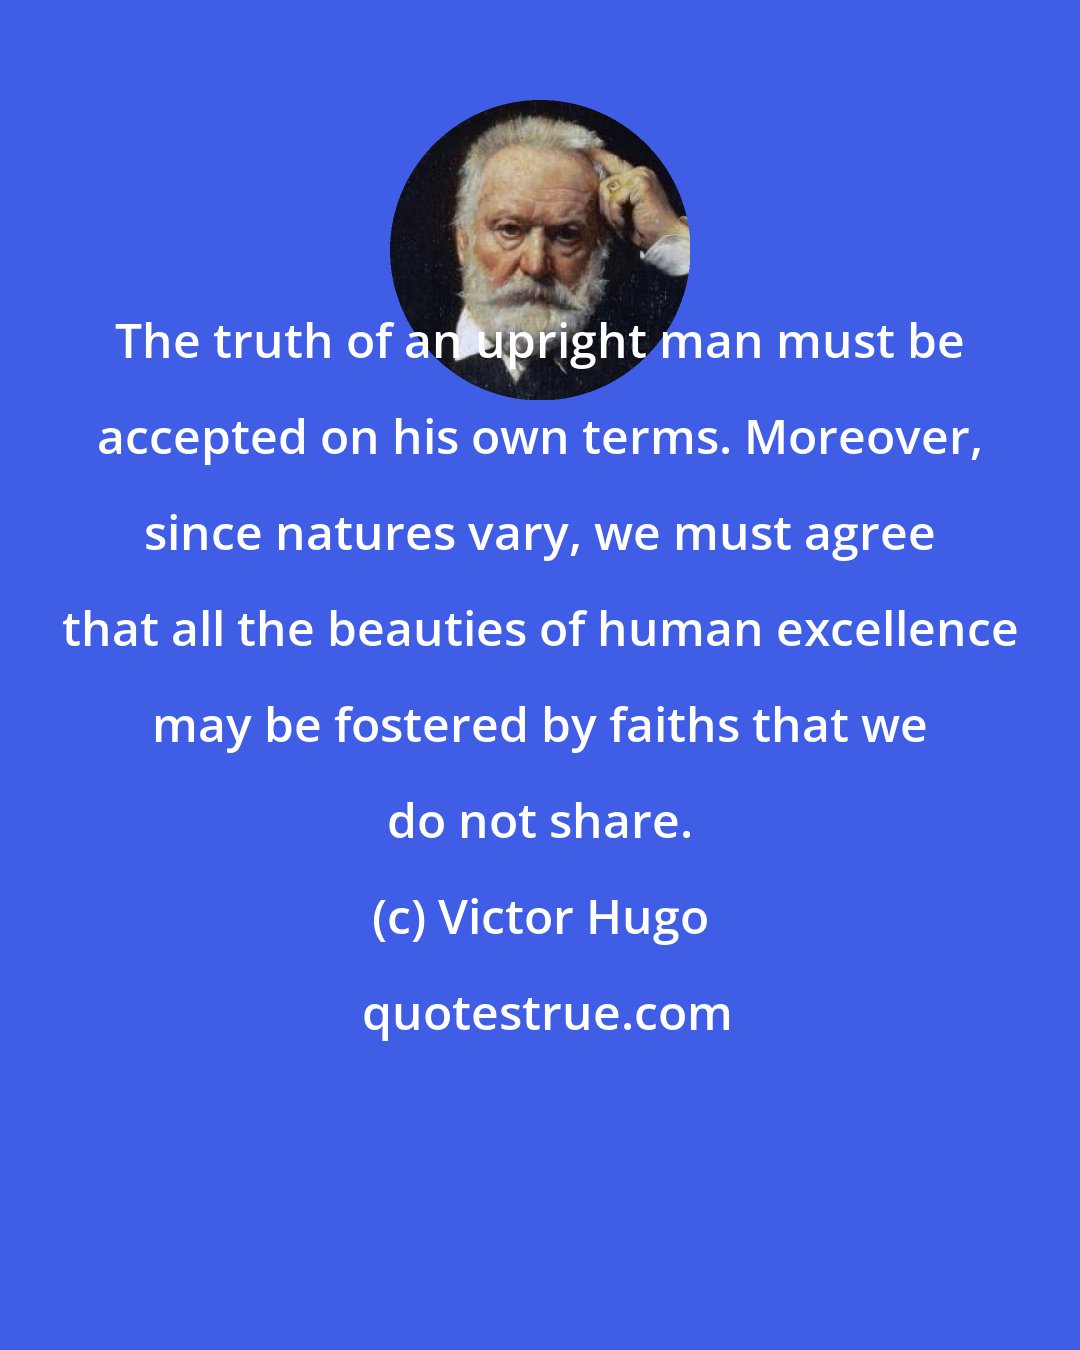 Victor Hugo: The truth of an upright man must be accepted on his own terms. Moreover, since natures vary, we must agree that all the beauties of human excellence may be fostered by faiths that we do not share.